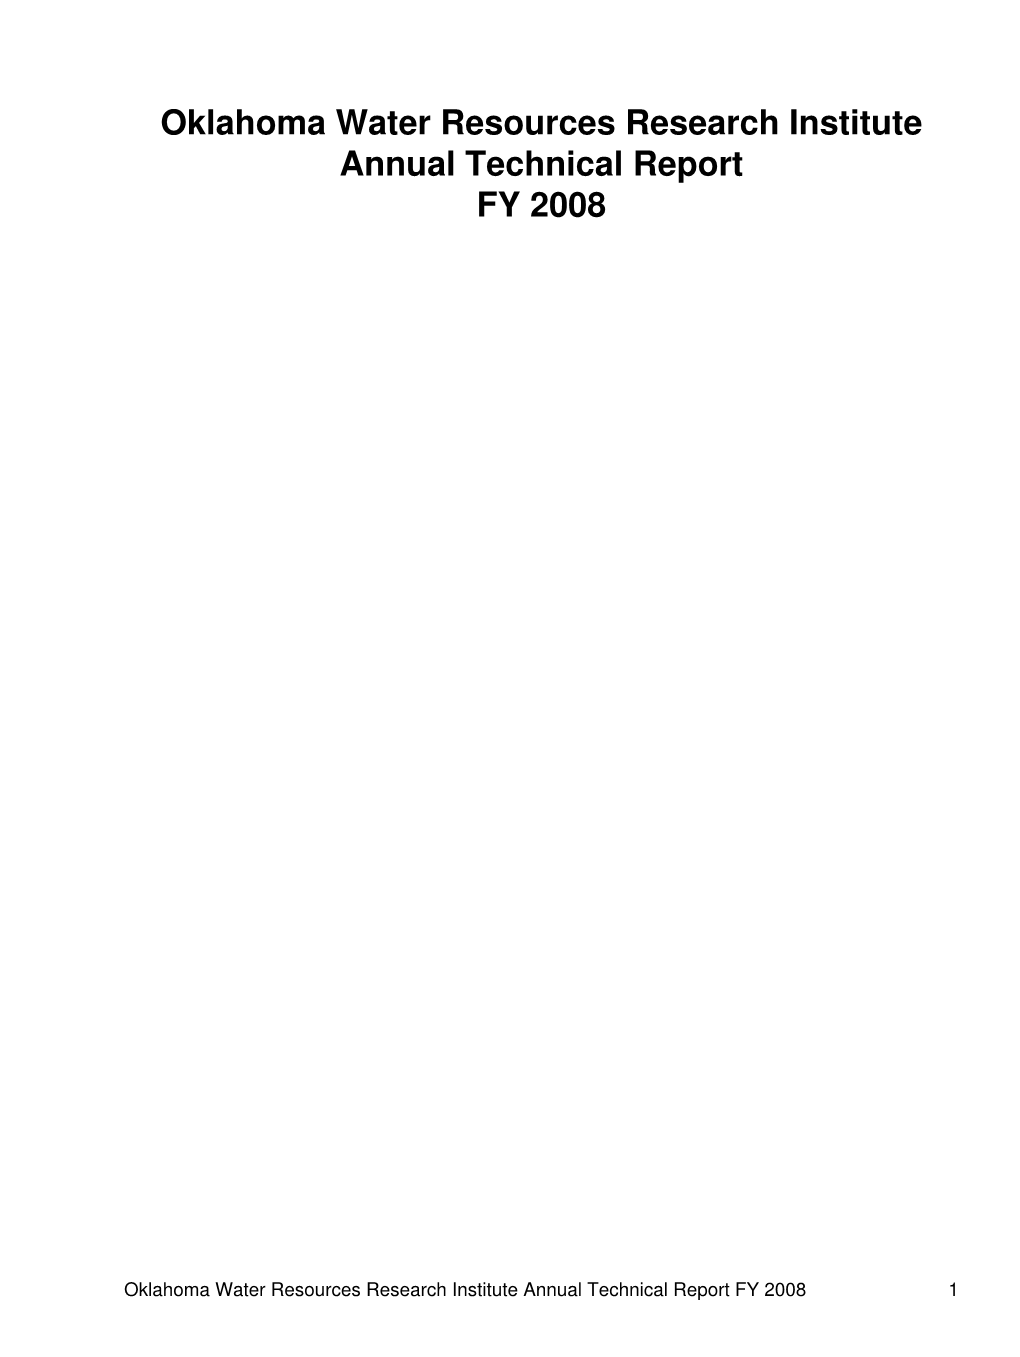 Oklahoma Water Resources Research Institute Annual Technical Report FY 2008